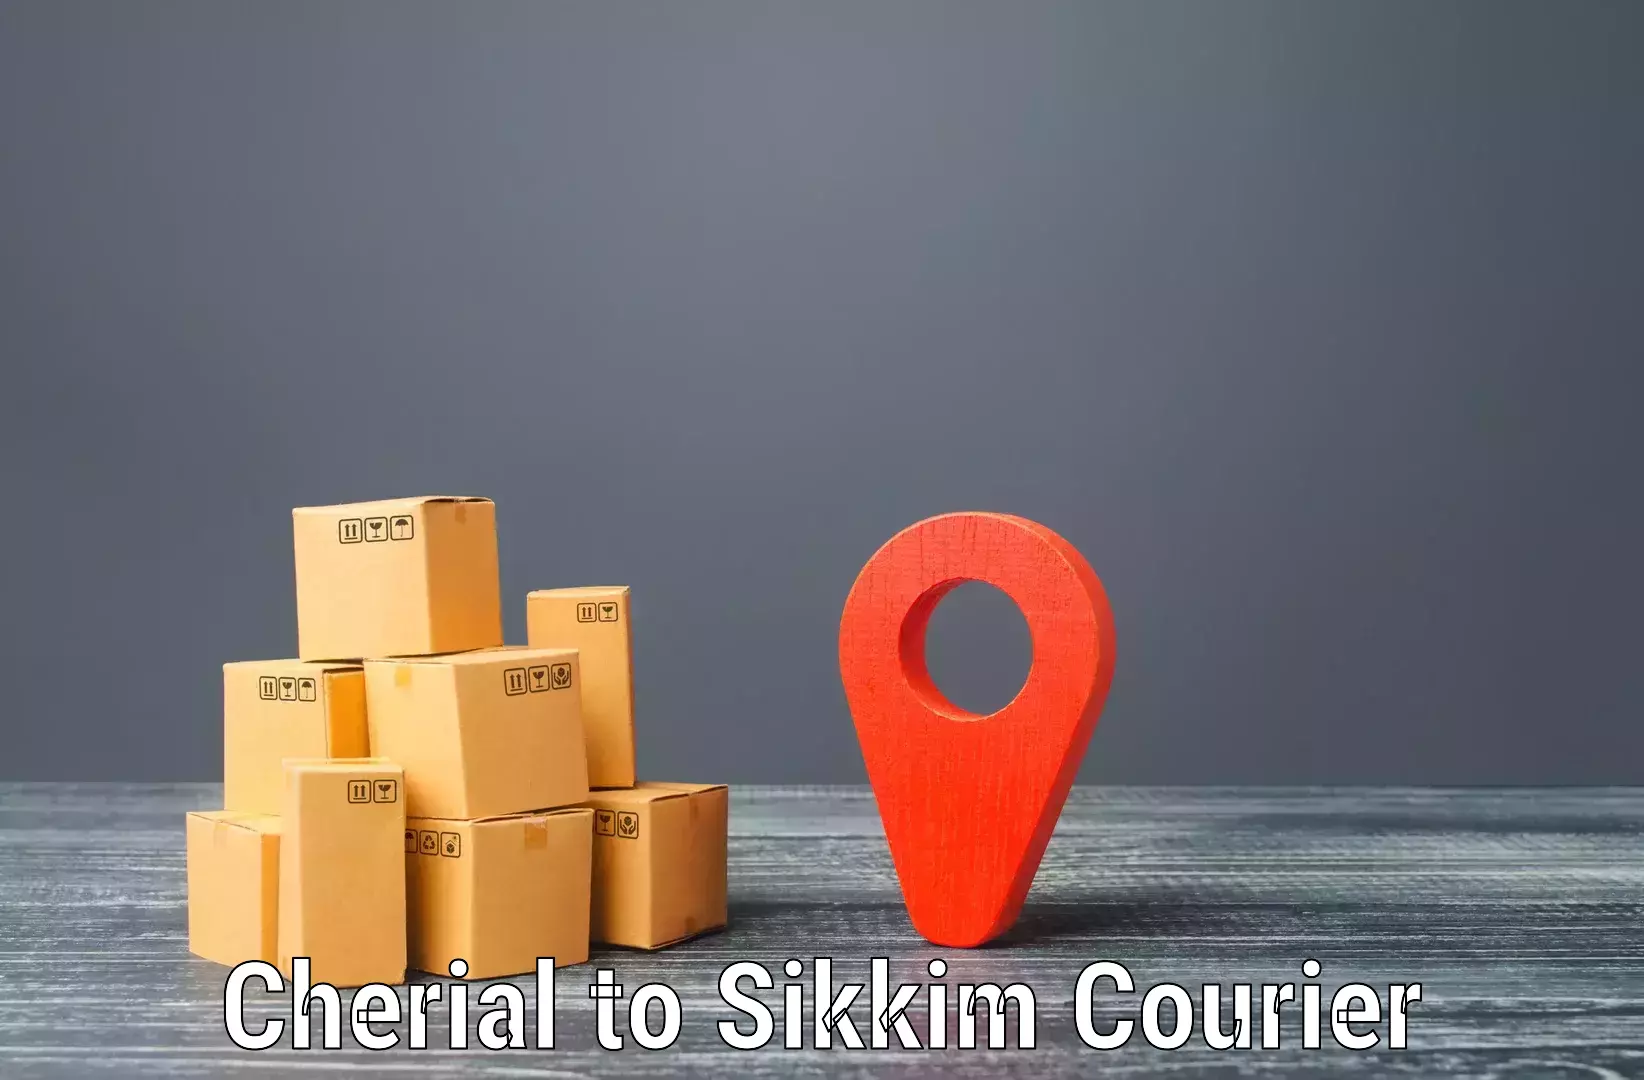 Cash on delivery service Cherial to Sikkim